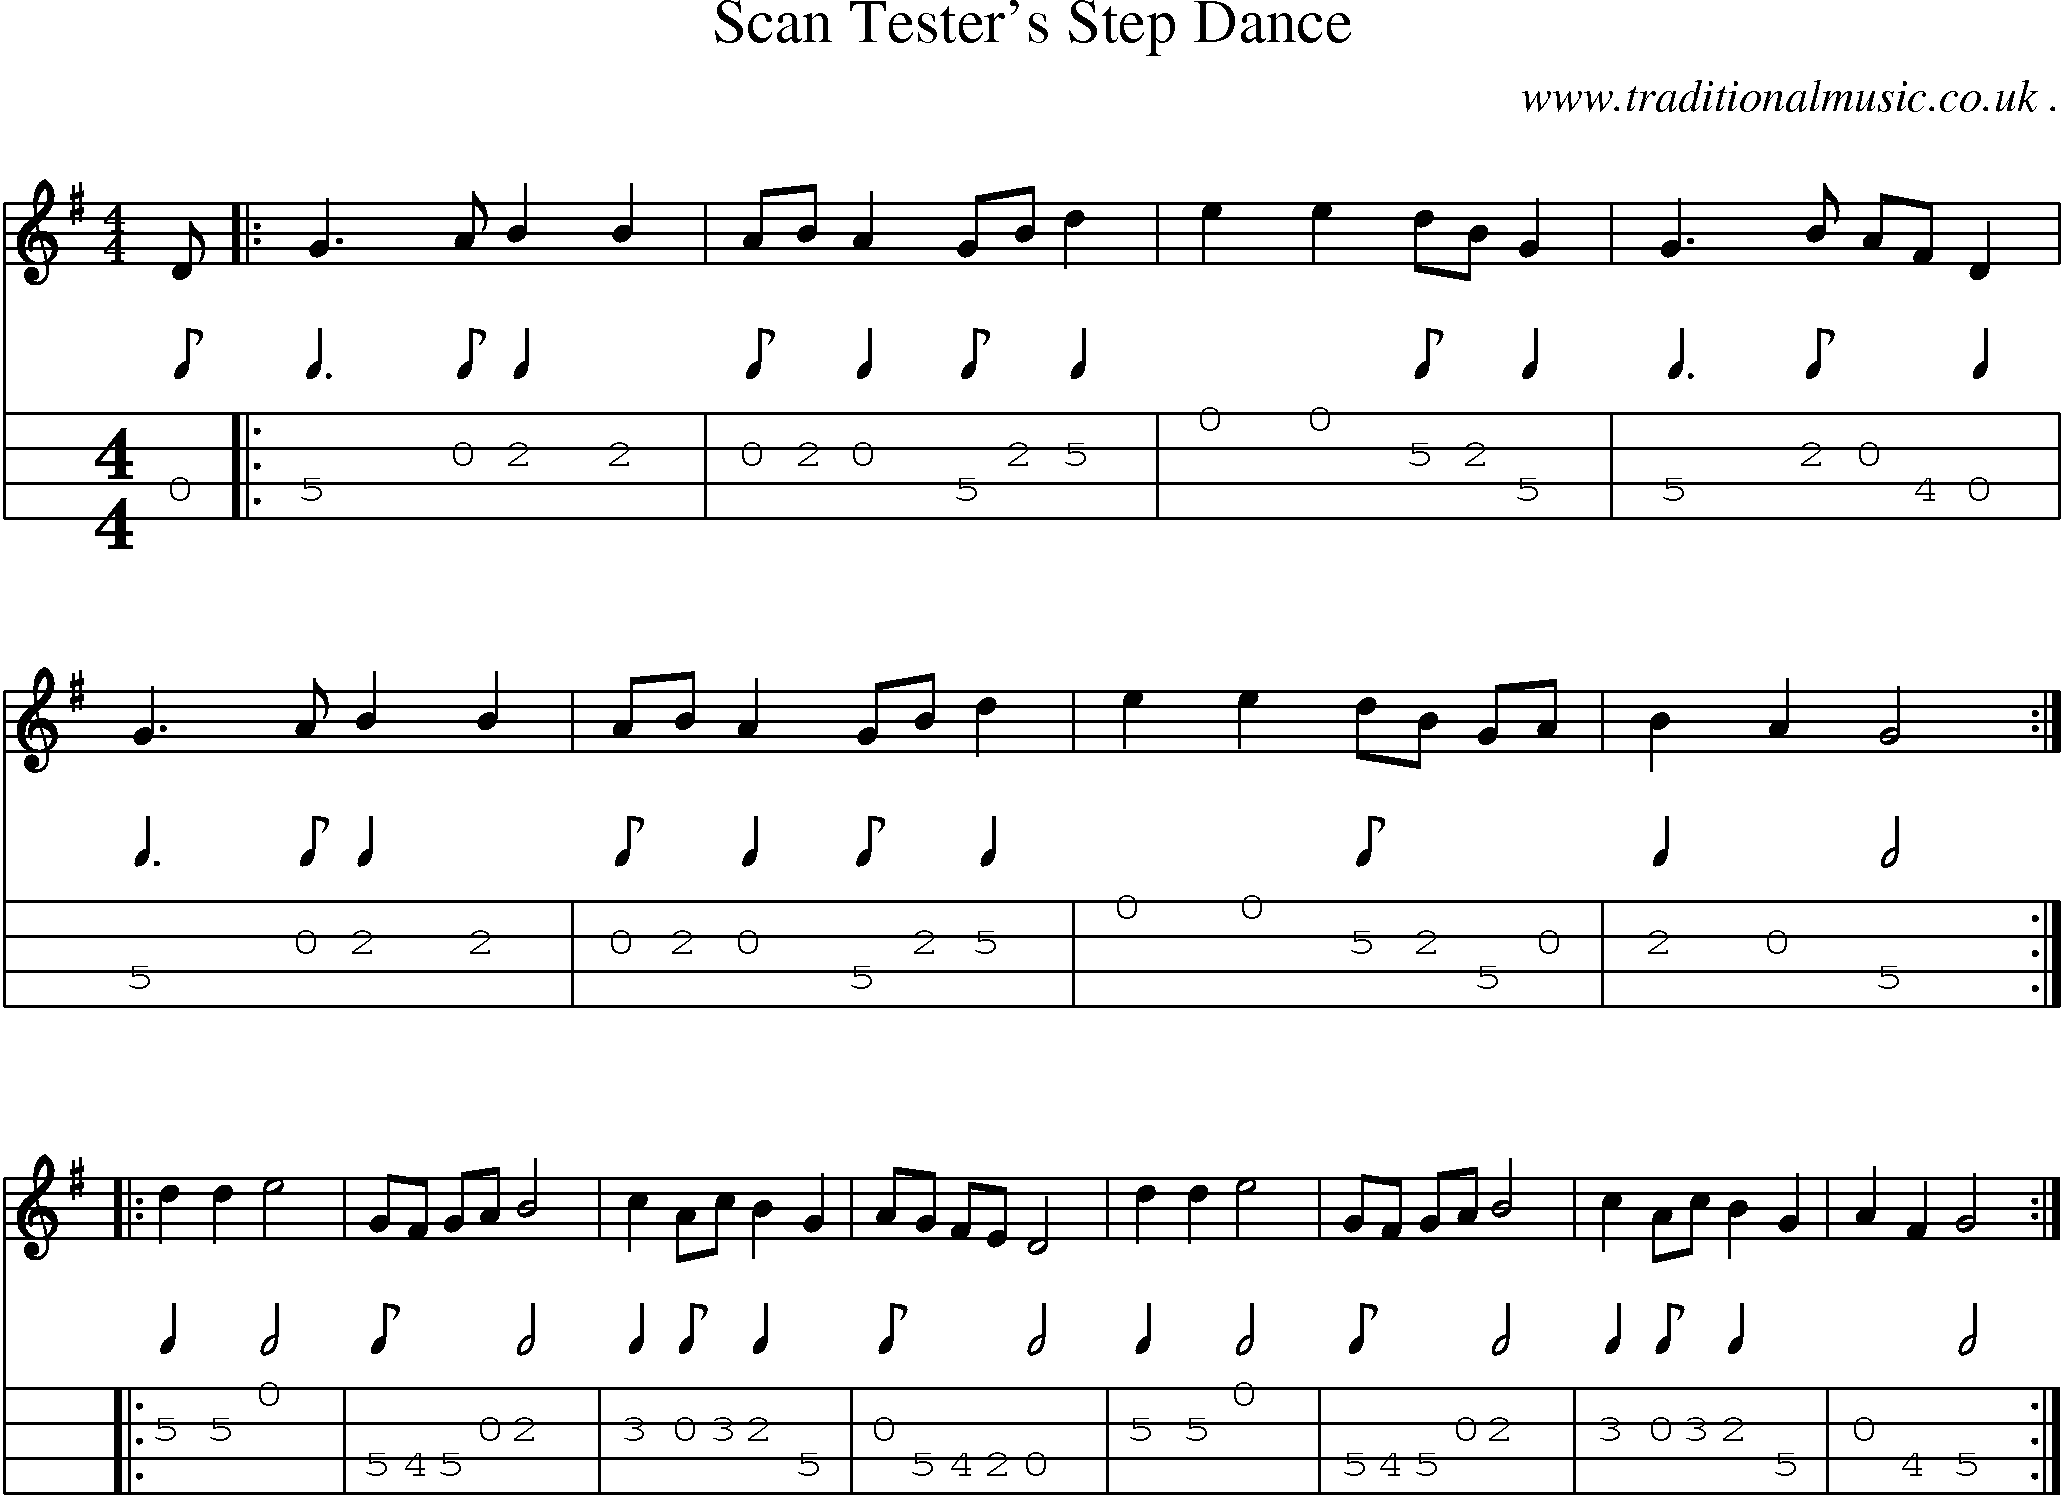 Sheet-Music and Mandolin Tabs for Scan Testers Step Dance